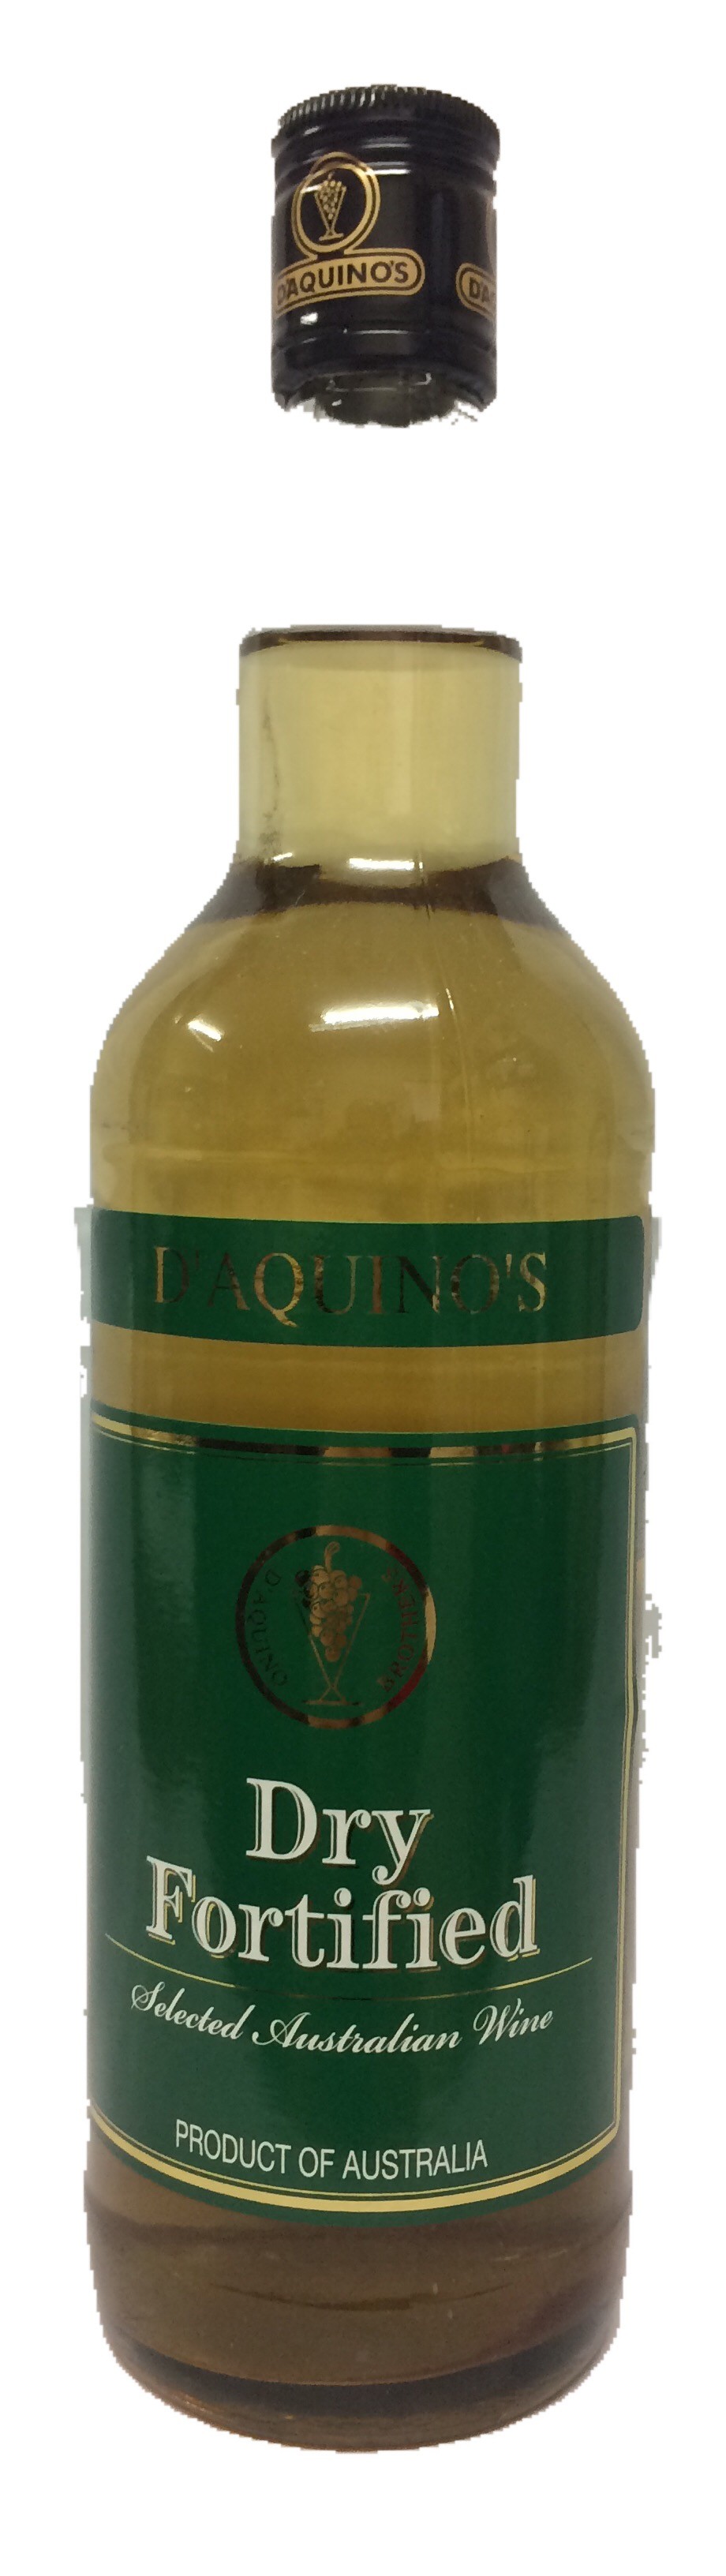 D'Aquinos Dry Fortified 750ml